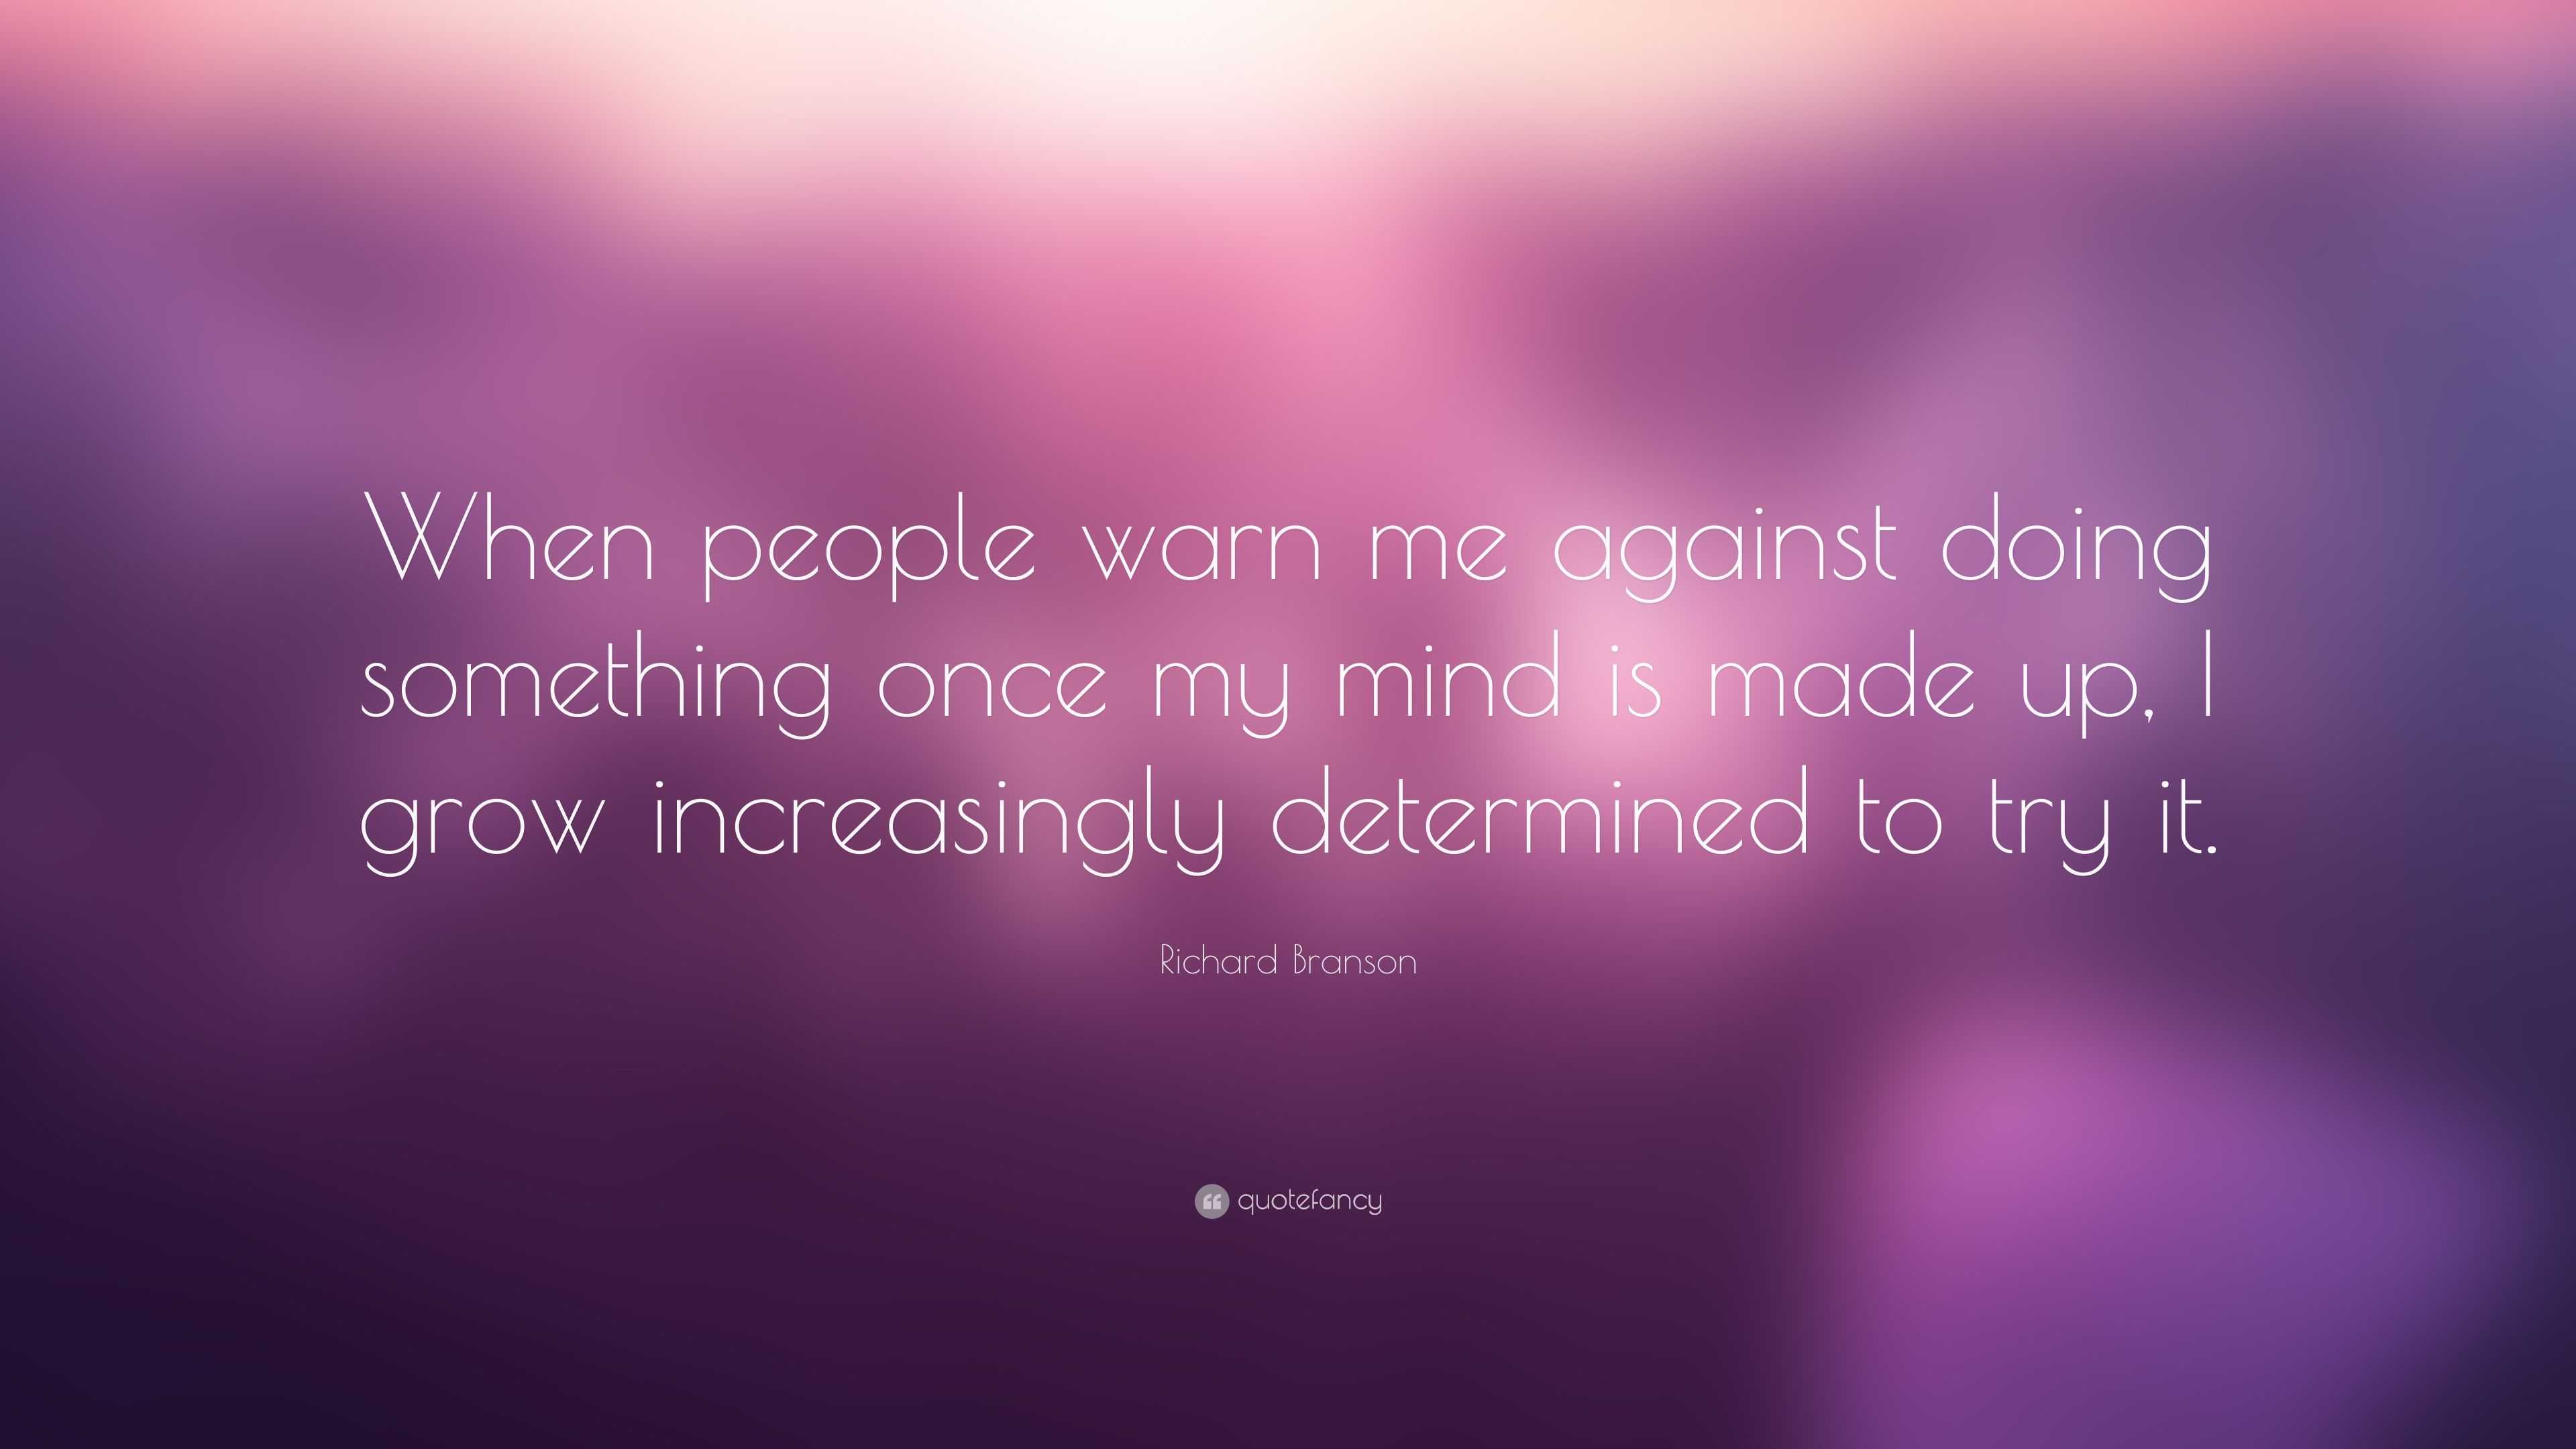 Richard Branson Quote: “When people warn me against doing something ...